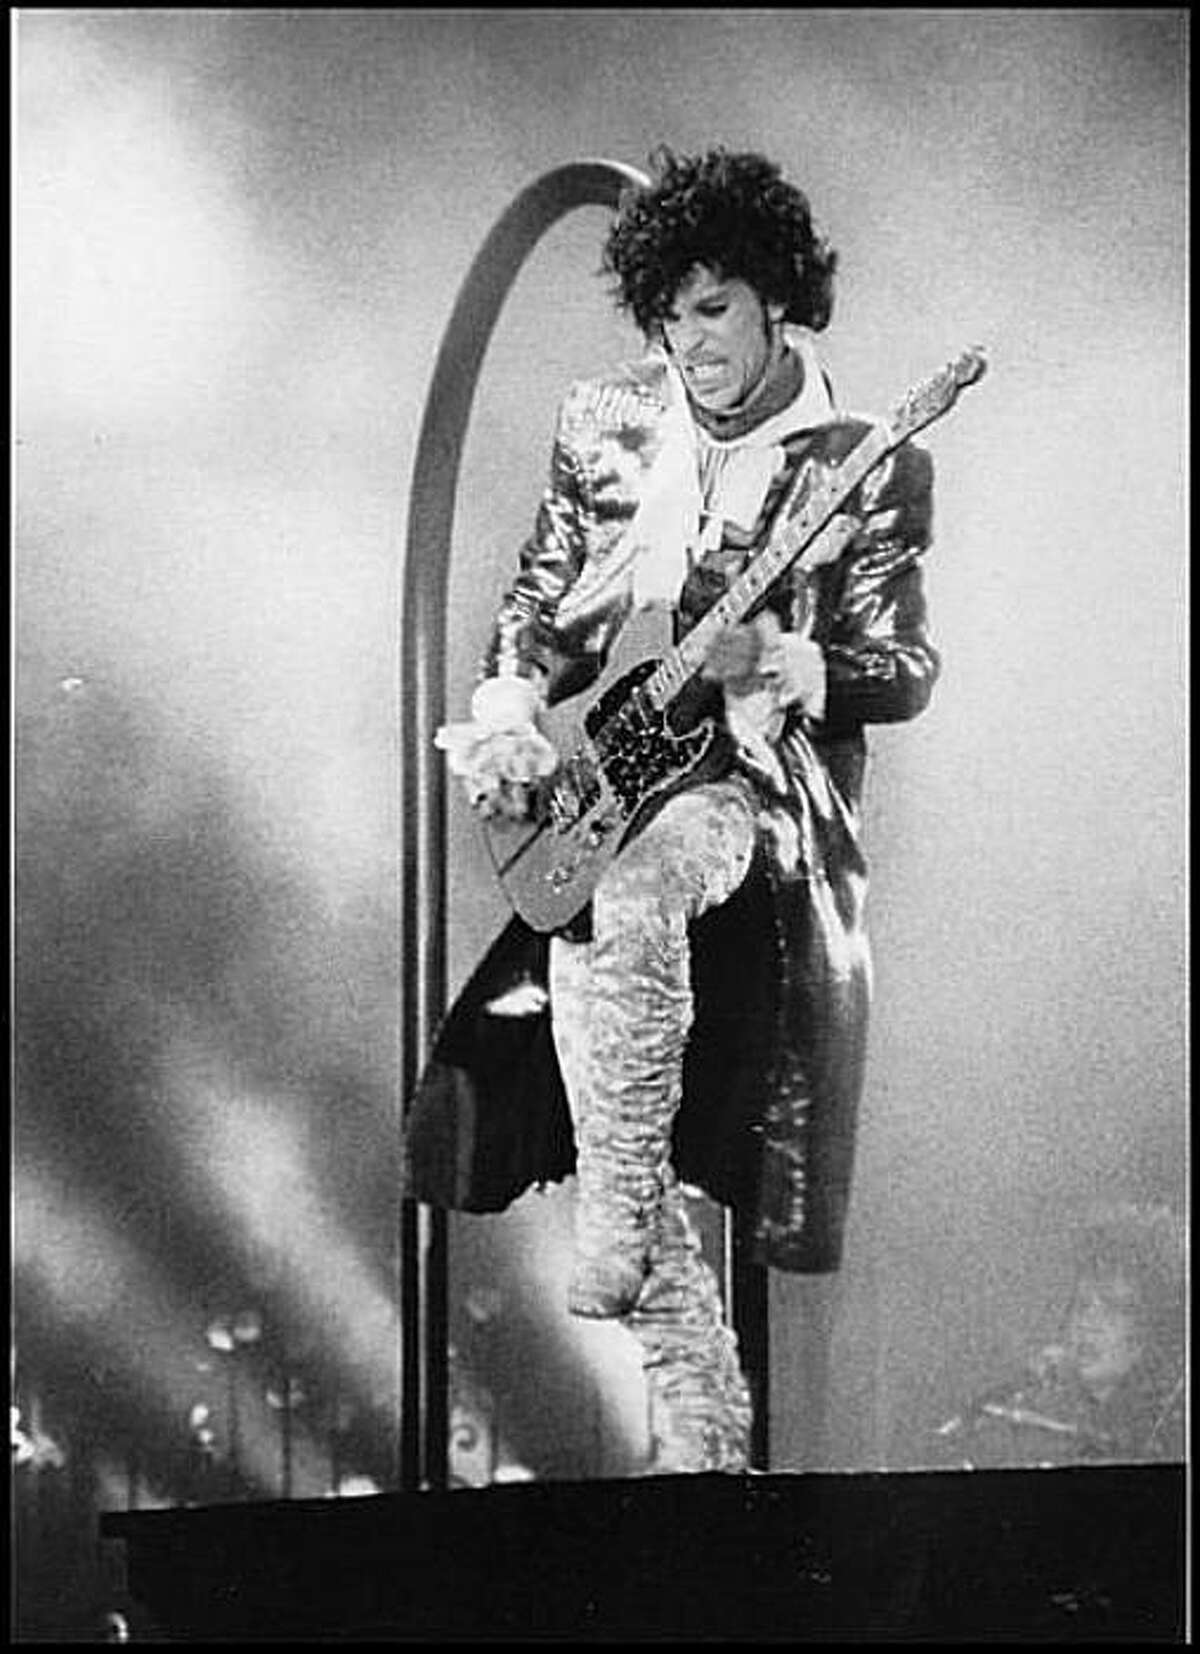 Prince played the Cow Palace in 1985.